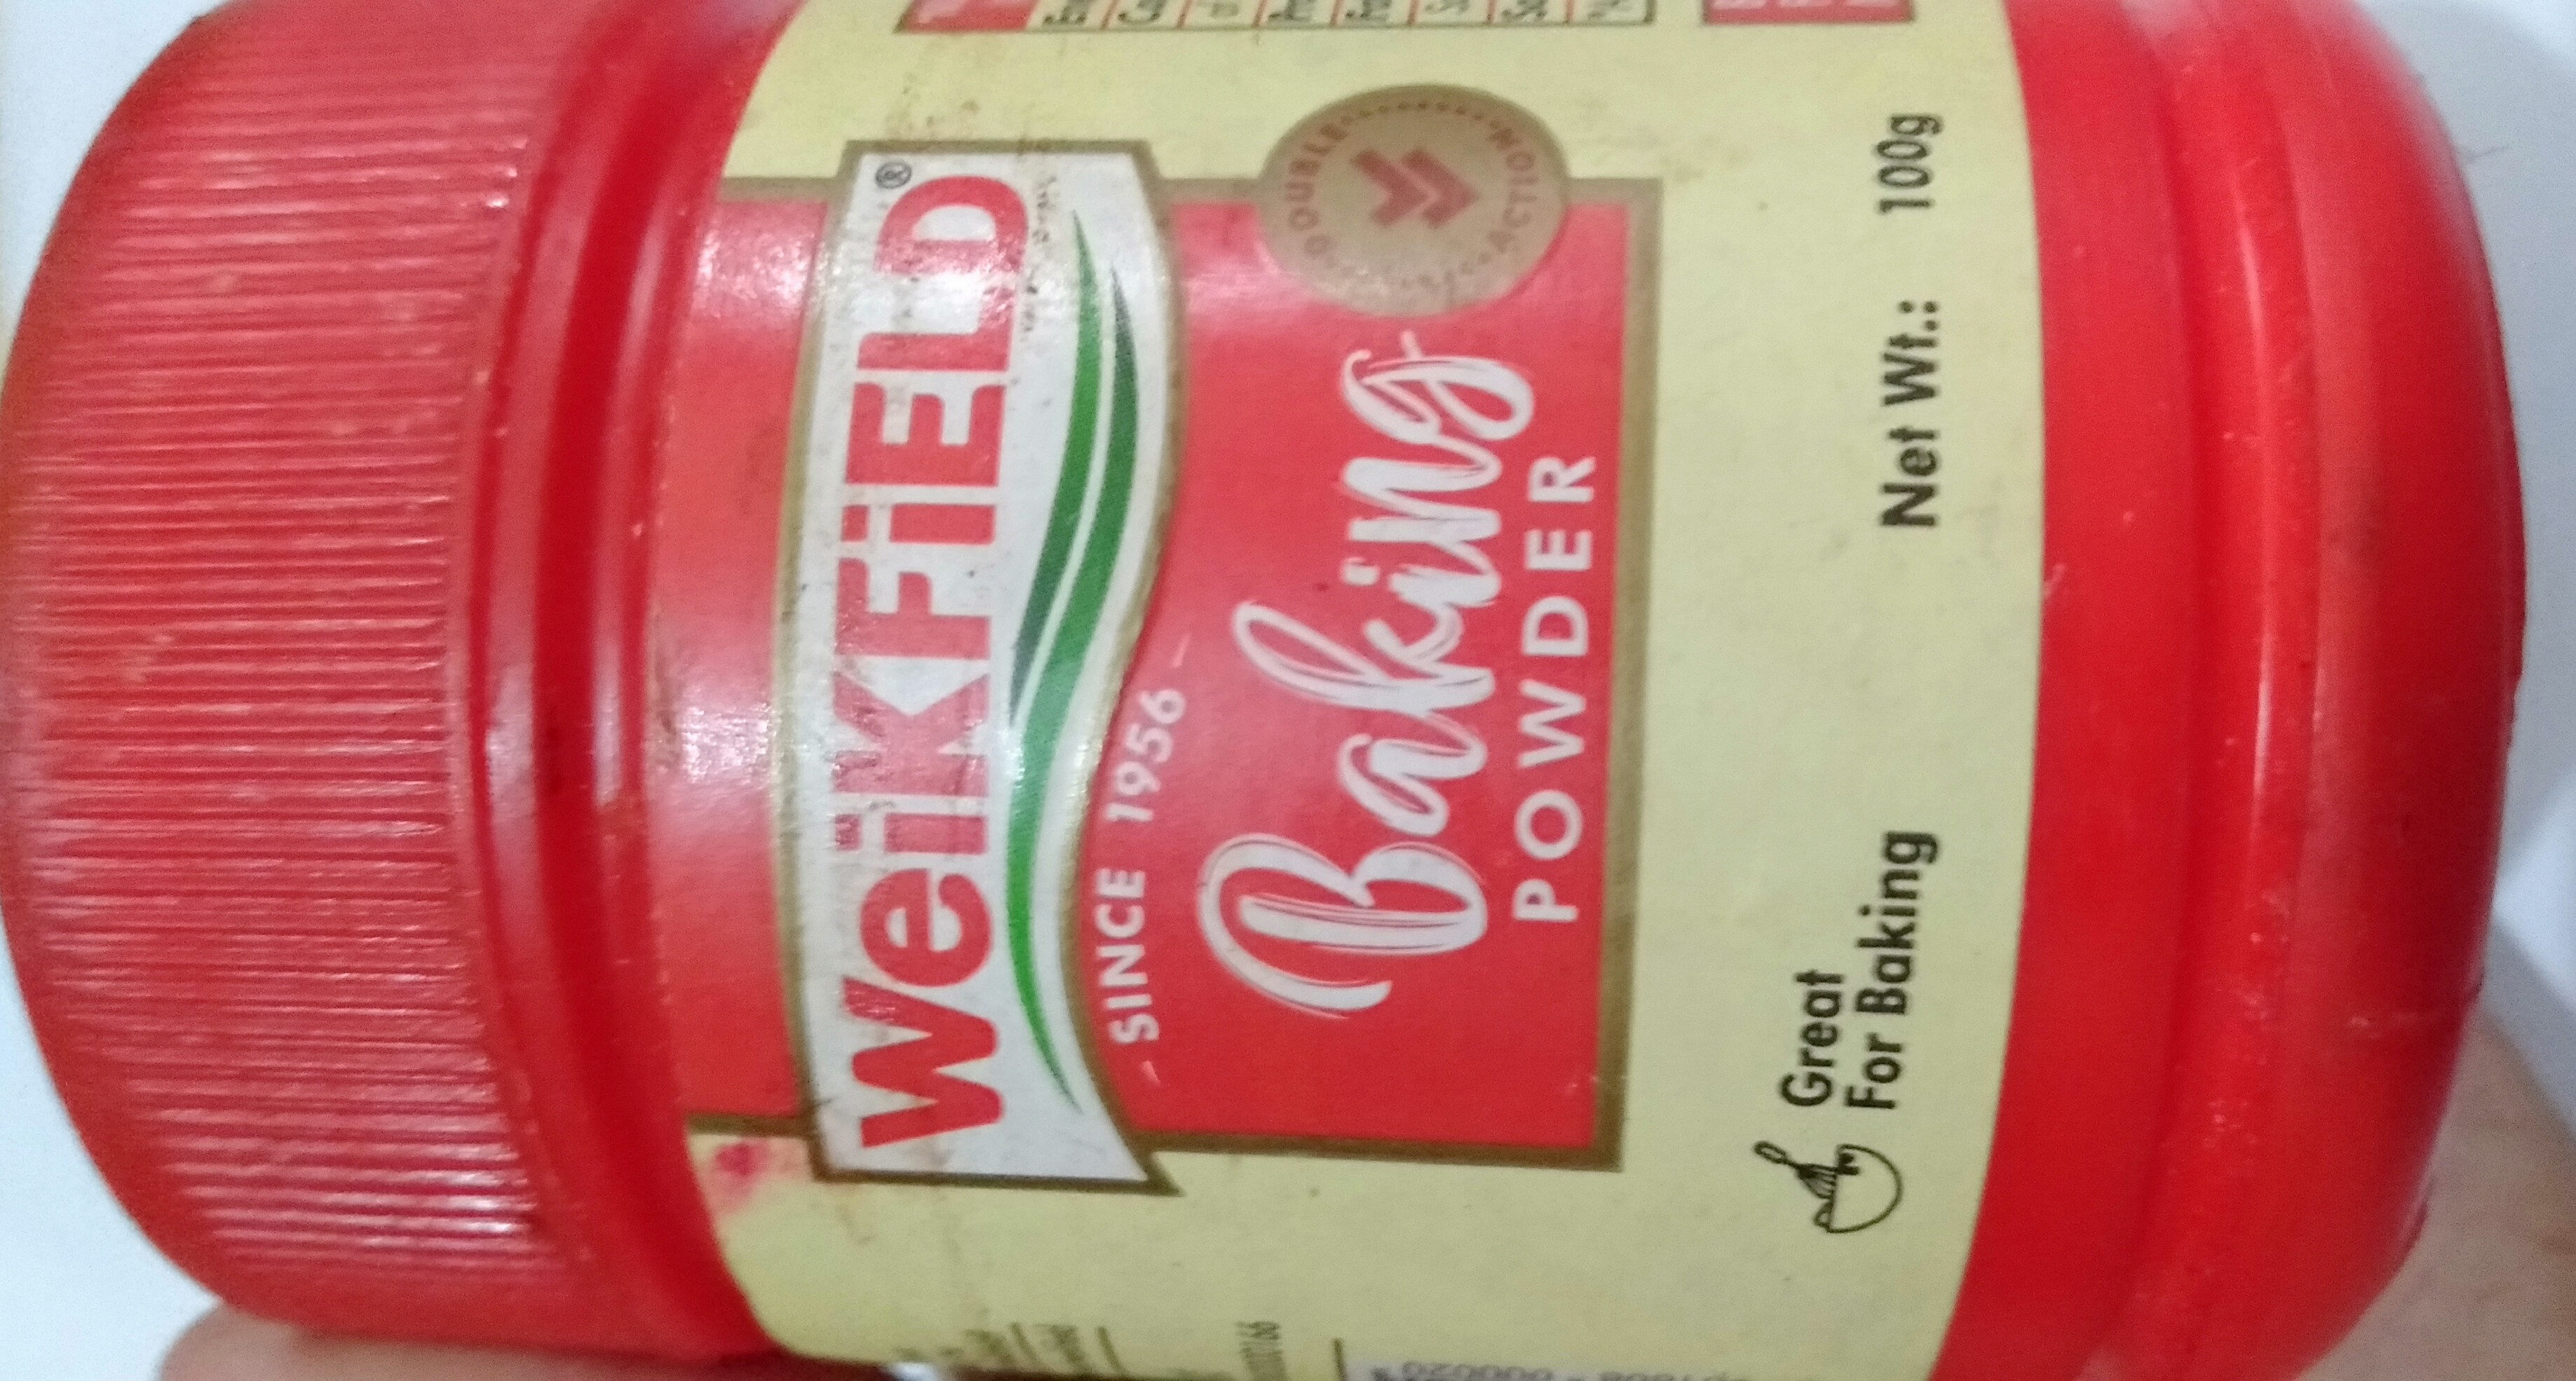 WeikField baking powder - Product